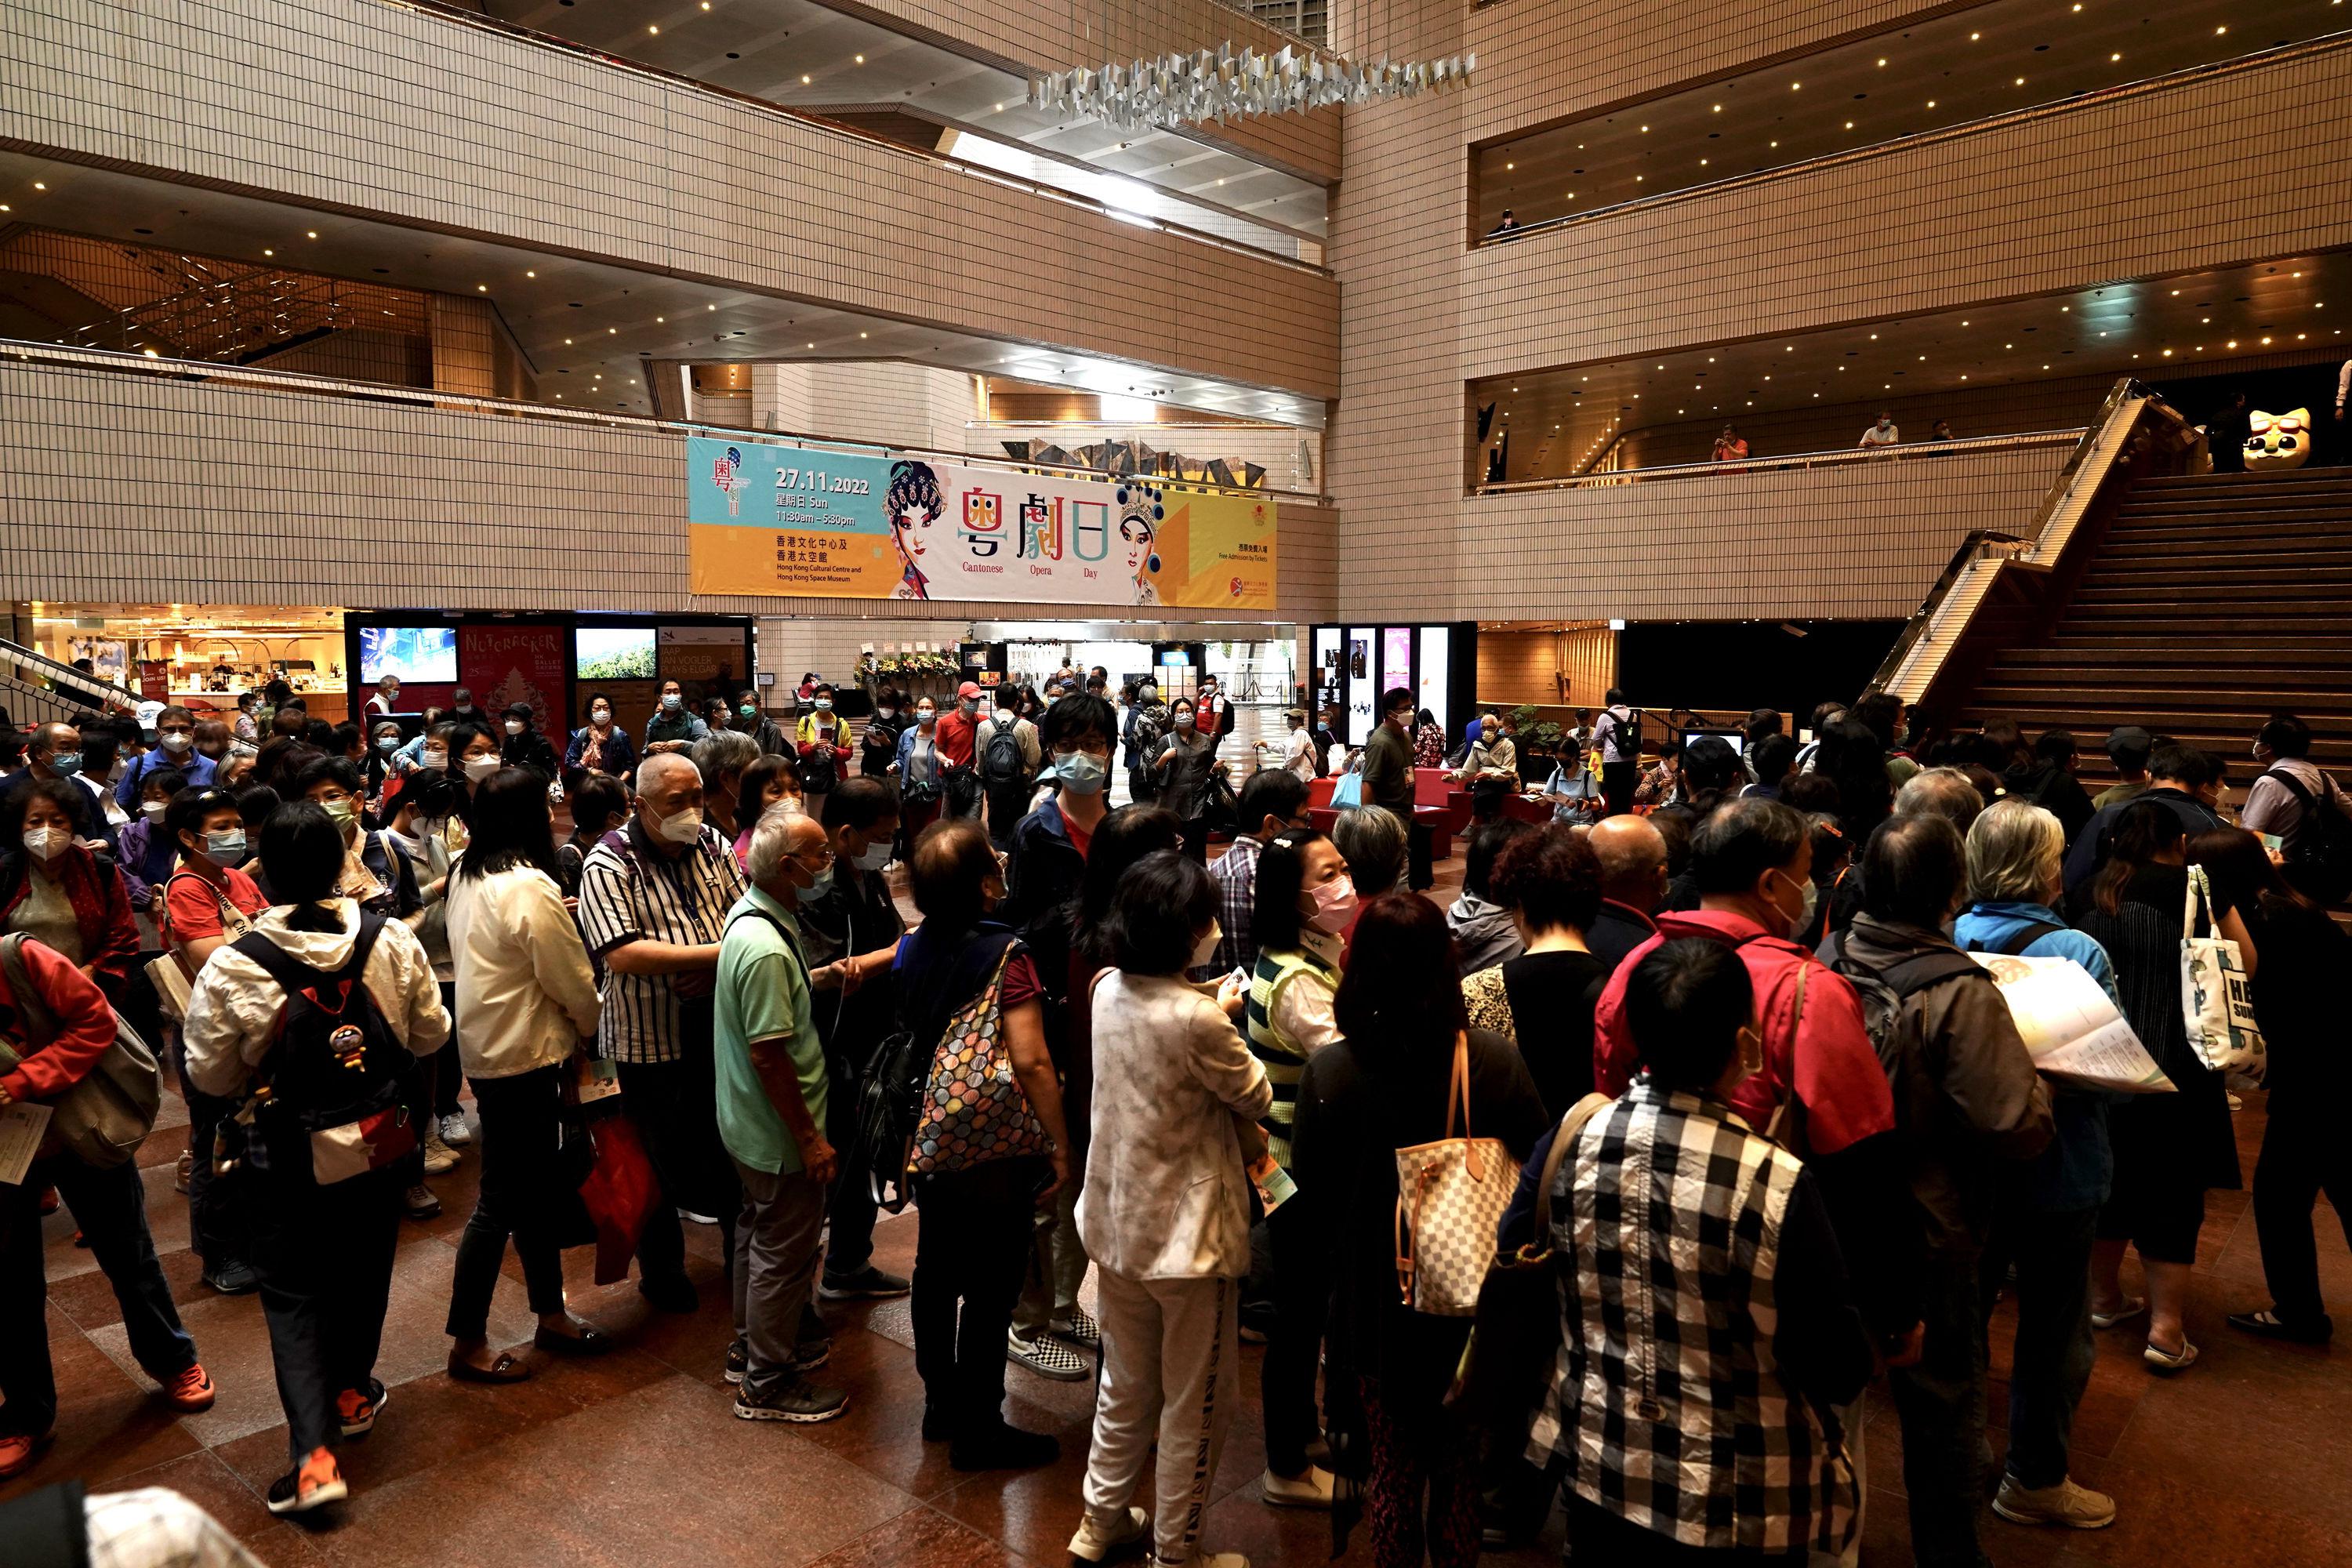 The annual Cantonese Opera Day, presented by the Leisure and Cultural Services Department, celebrated its 20th anniversary today (November 27) with an array of free activities. Photo shows visitors taking part in the activity of Cantonese Opera Day at the Hong Kong Cultural Centre.